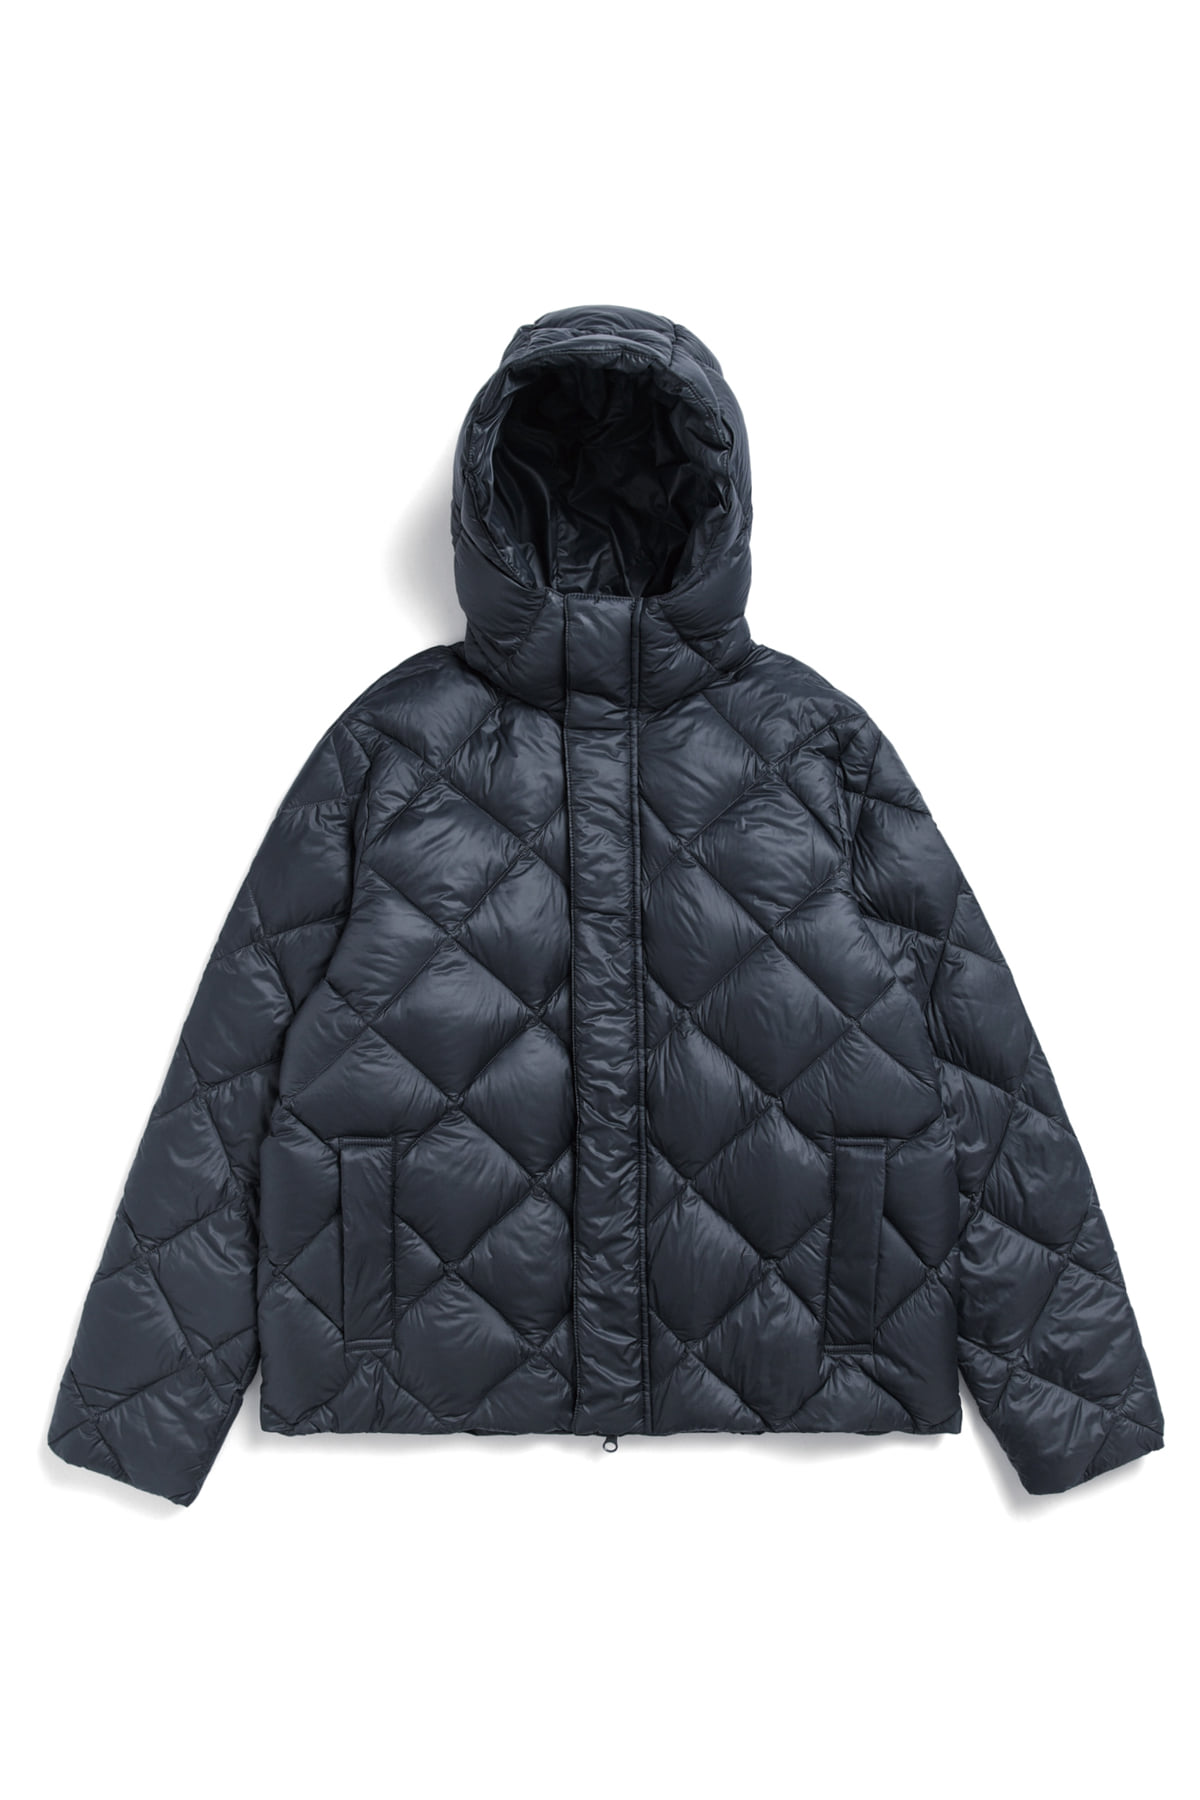 [TAION] HOOD DOWN JACKET _ OLIVE